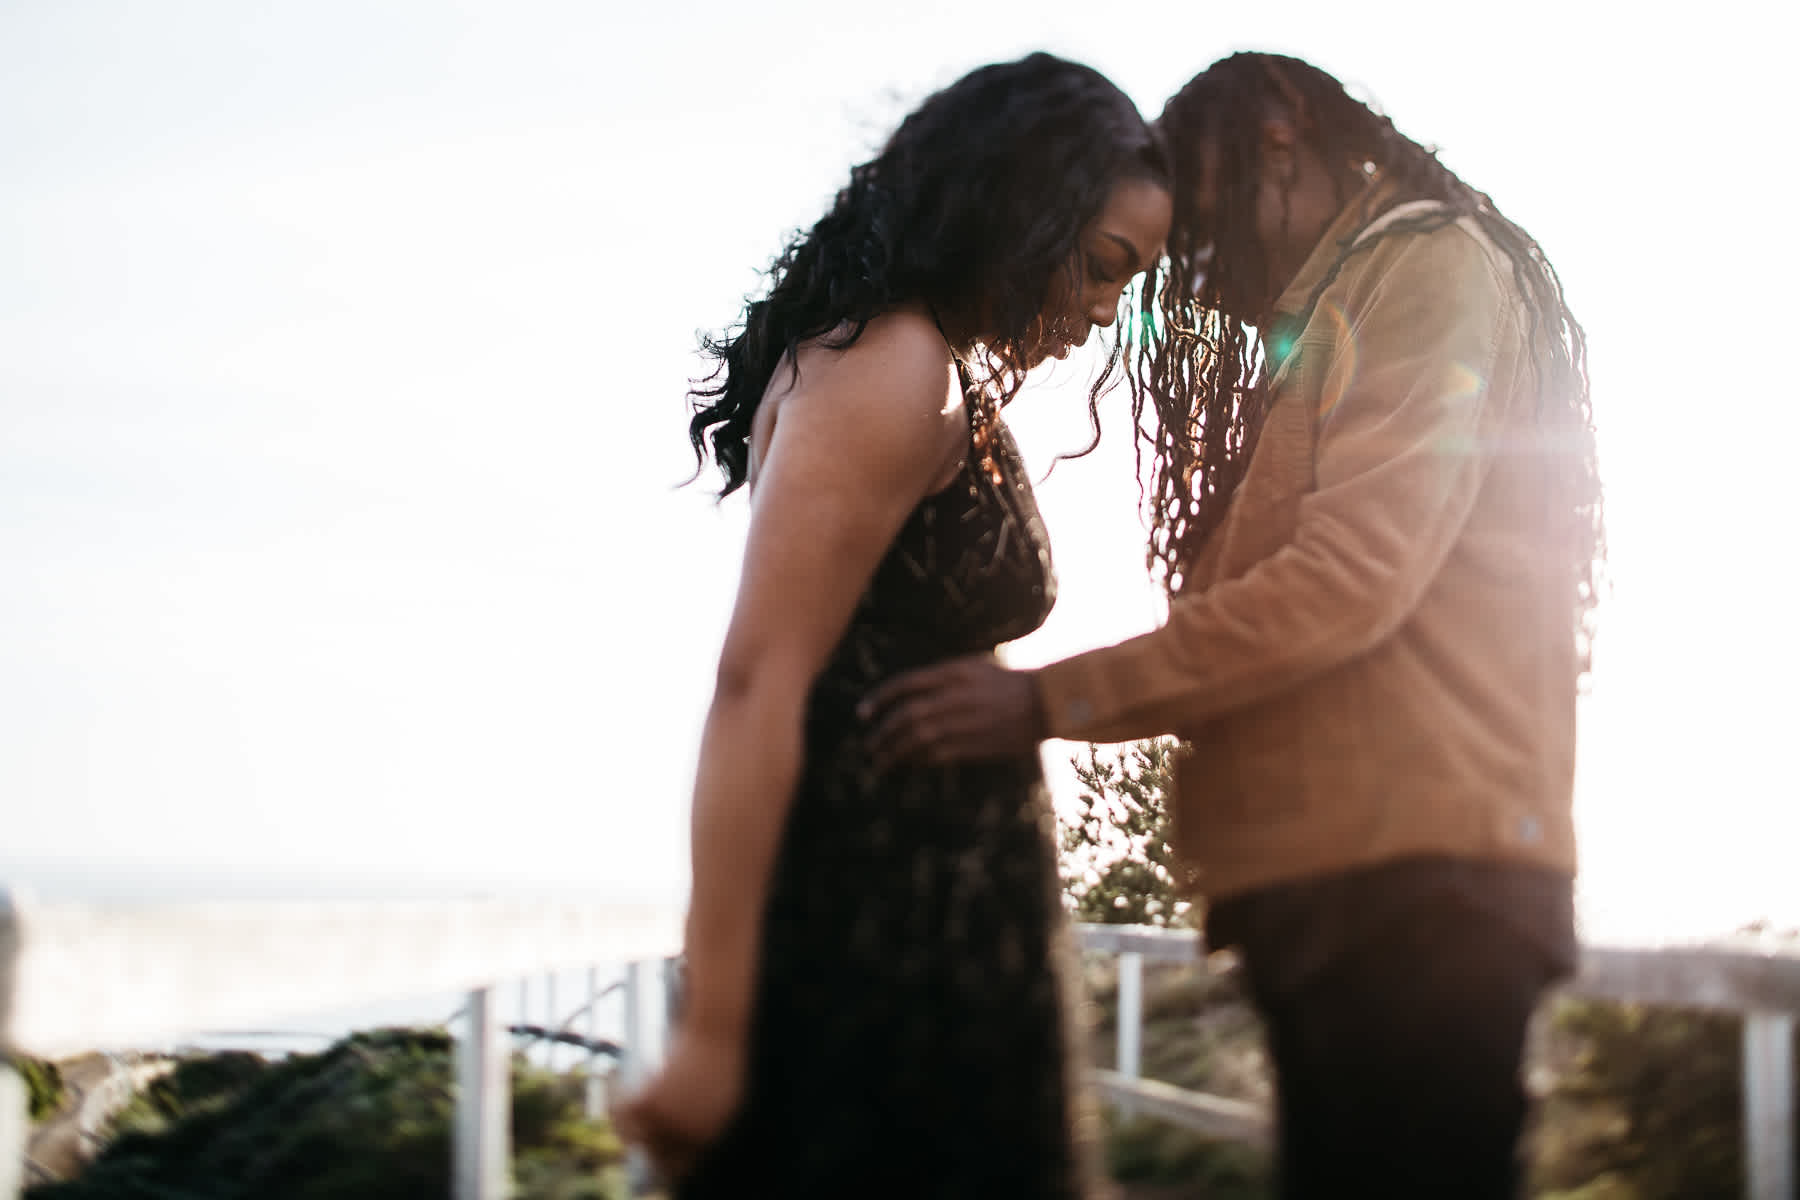 muir-beach-ca-spring-lifestyle-engagement-session-5